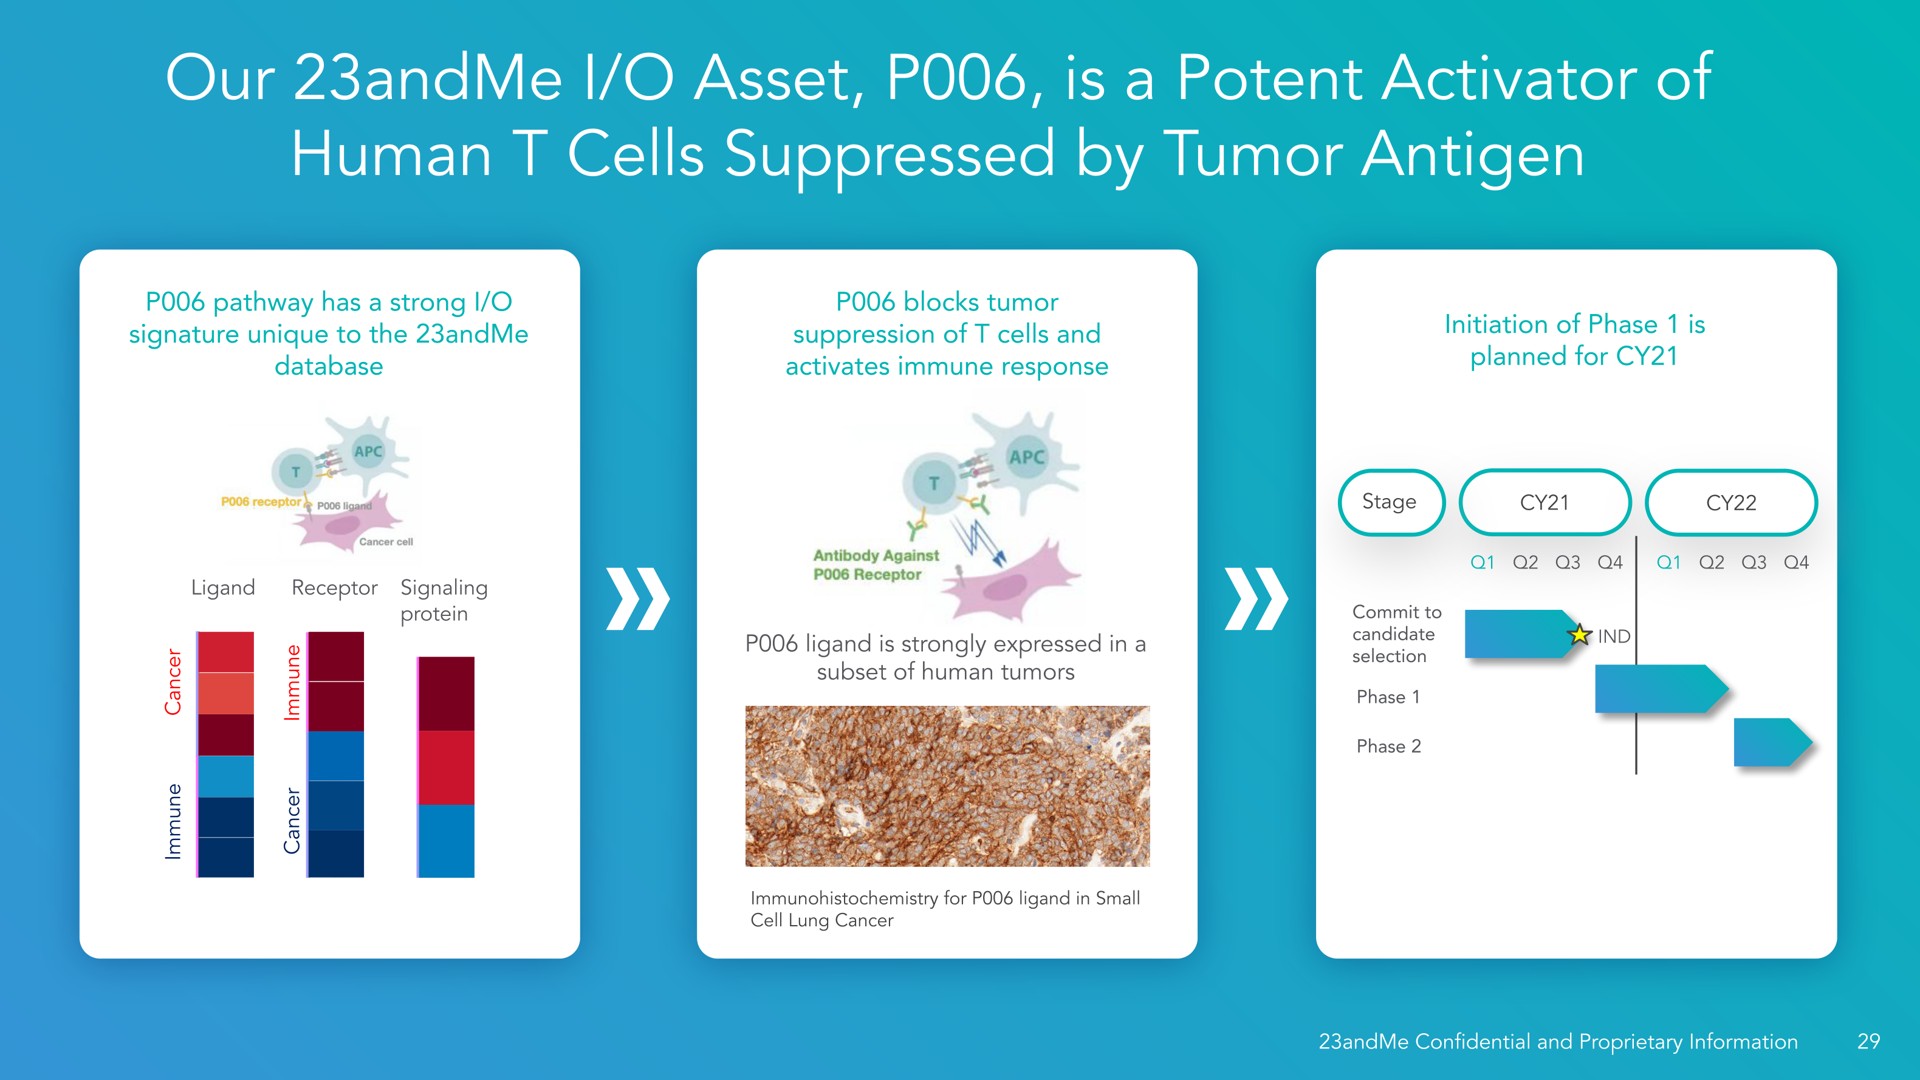 our i asset is a potent activator of human cells suppressed by tumor antigen a | 23andMe